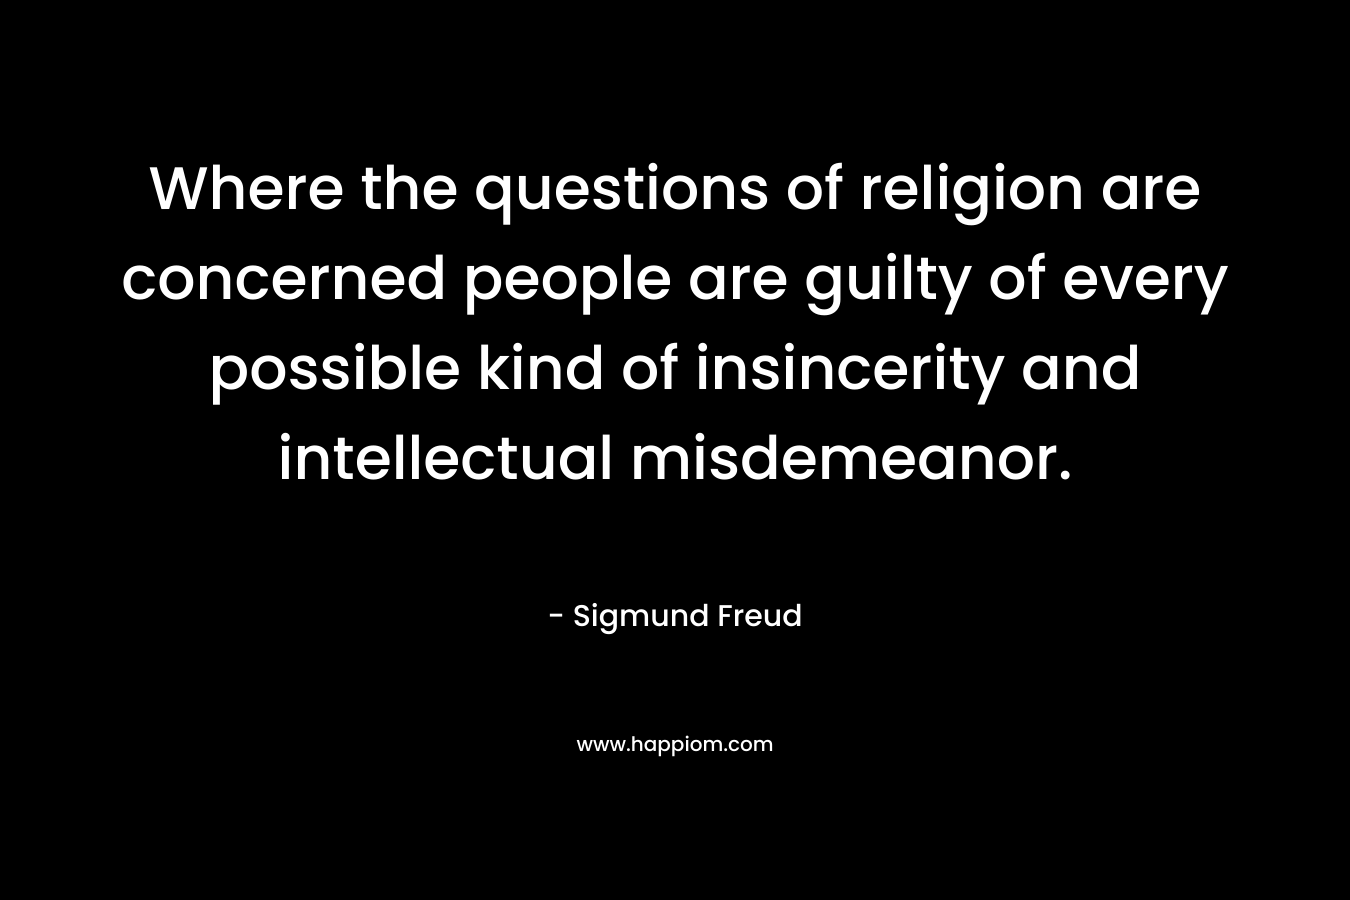 Where the questions of religion are concerned people are guilty of every possible kind of insincerity and intellectual misdemeanor. – Sigmund Freud